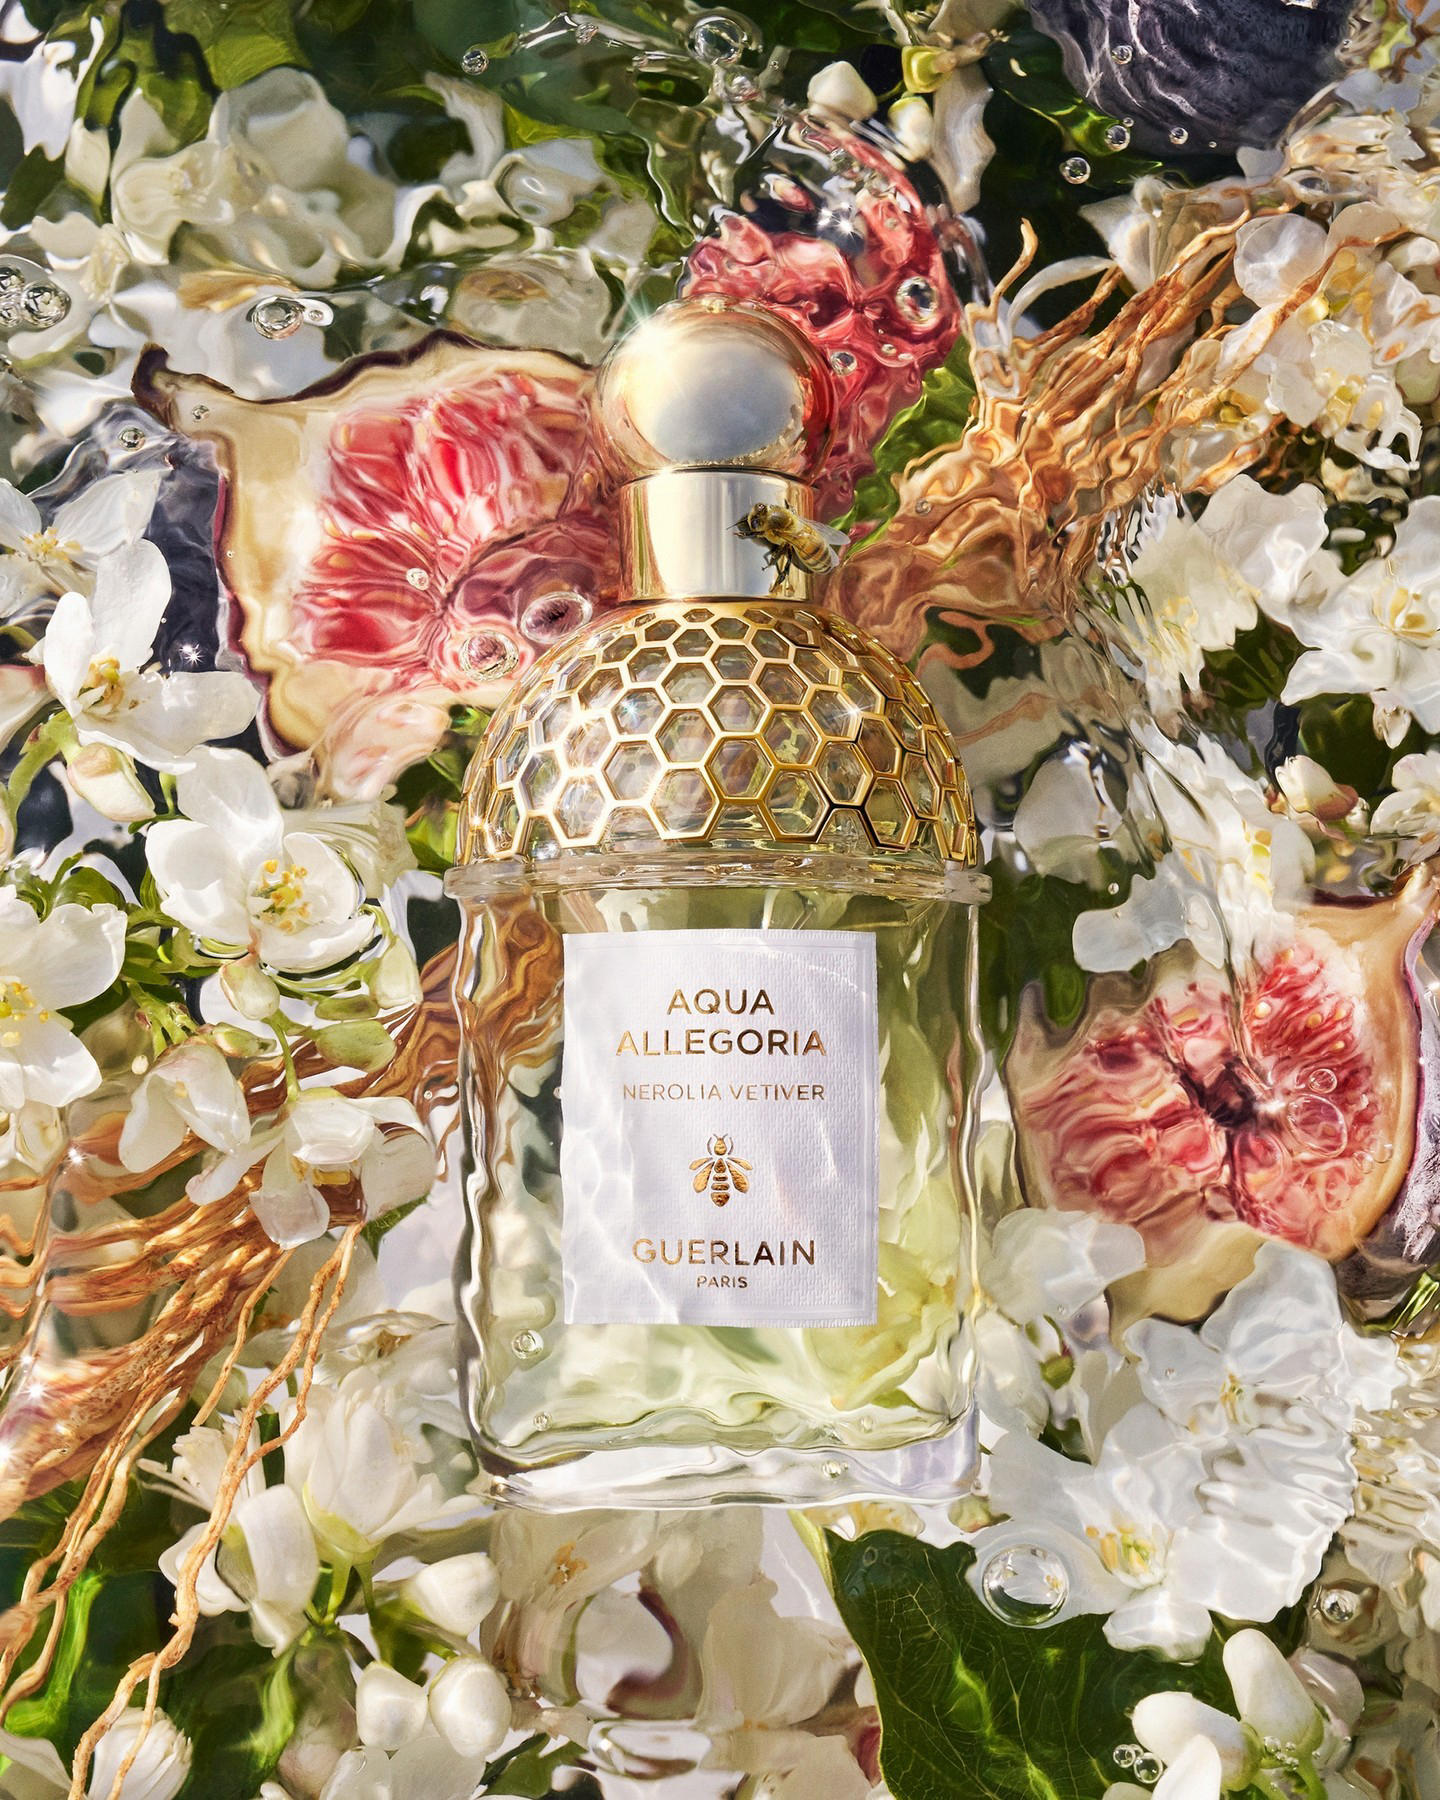 Guerlain - Driven by the conviction that the inspiration for the most beautiful fragrances is found